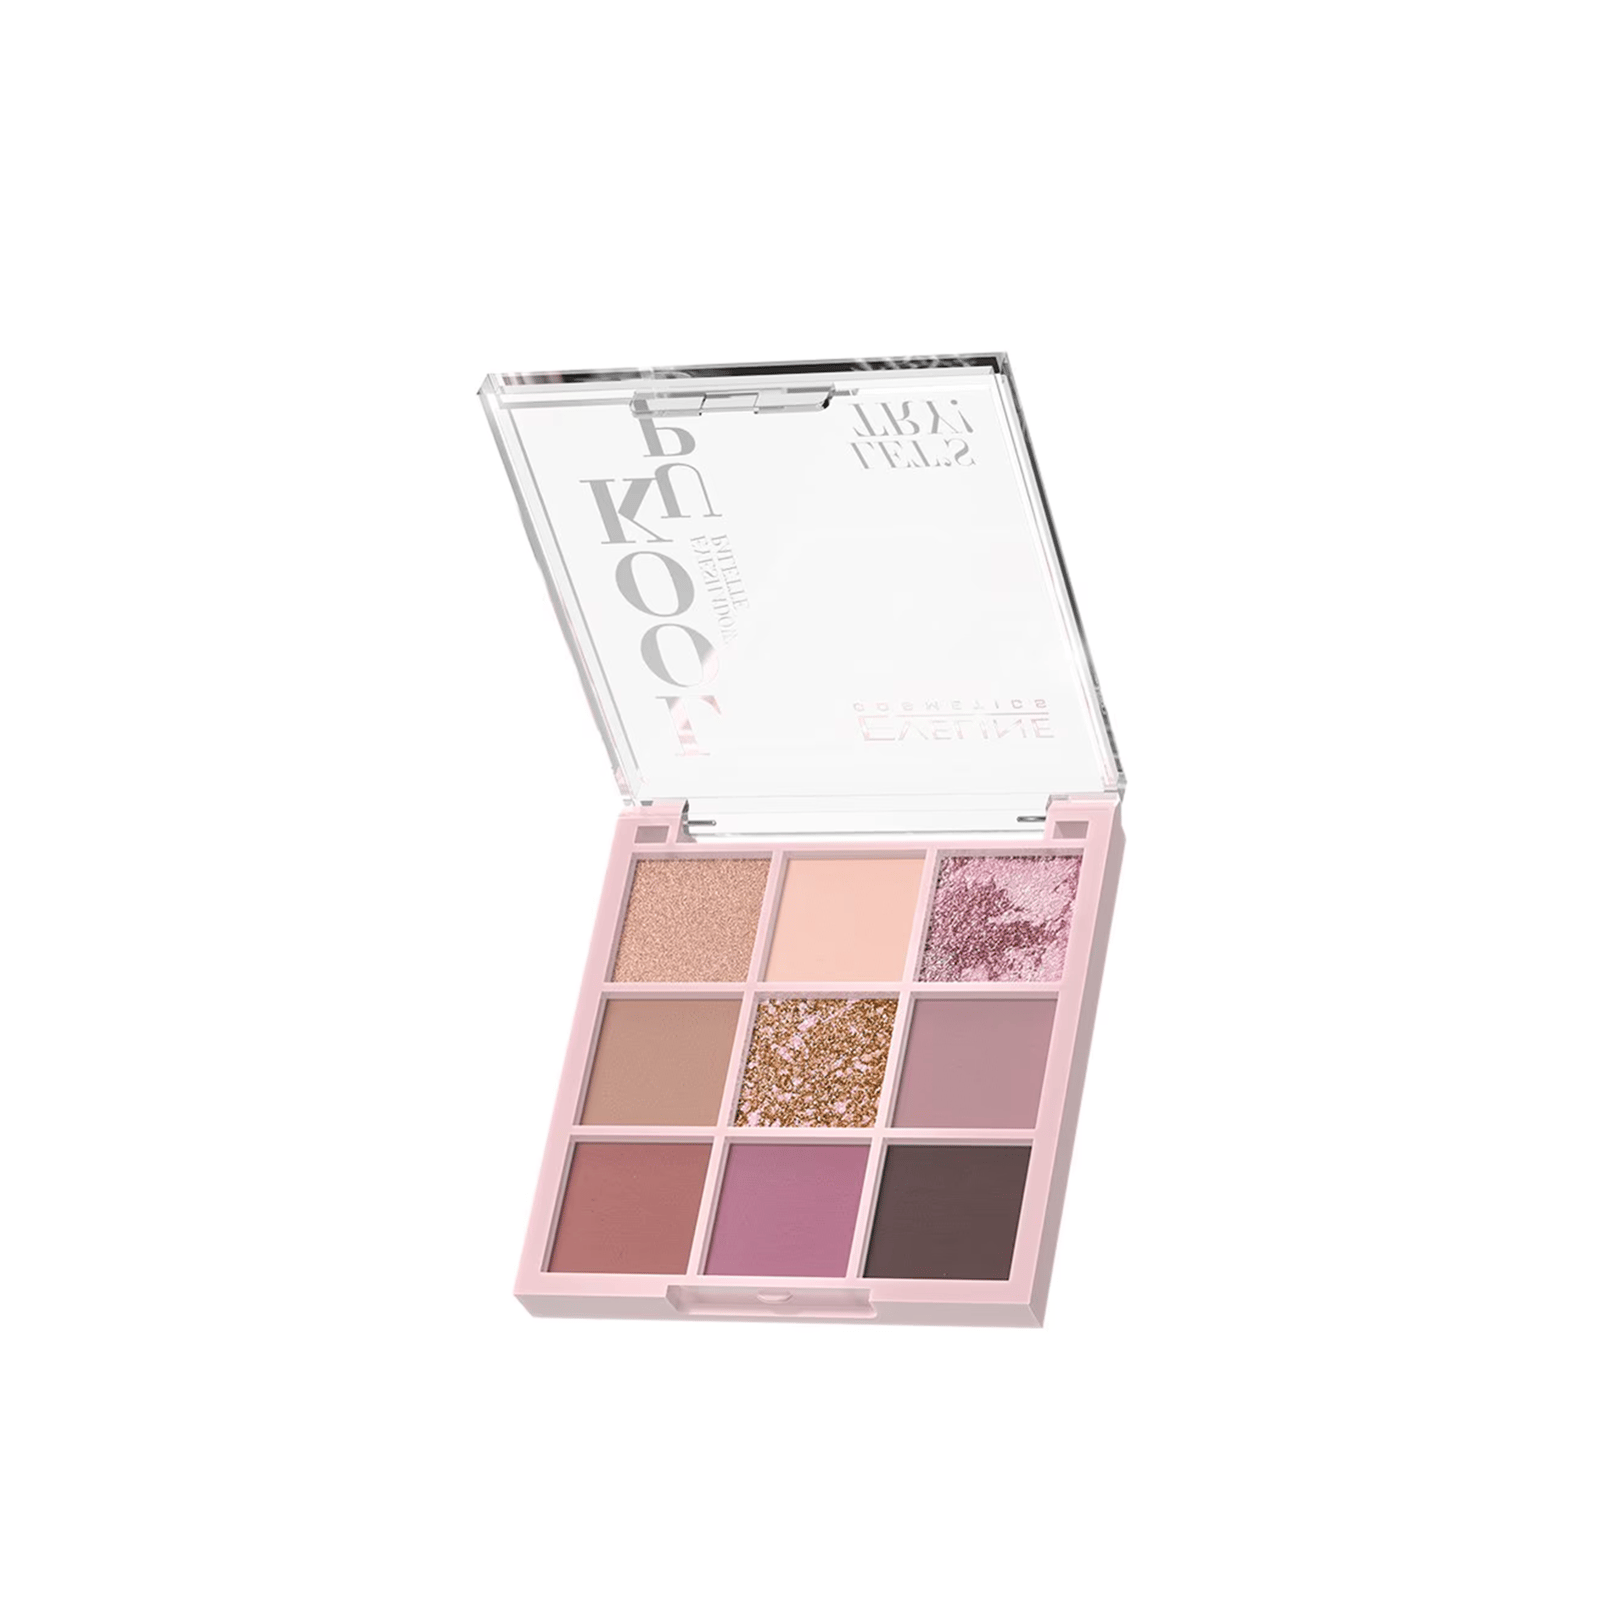 Eveline Cosmetics Look Up Eyeshadow Palette Let's Try!10.8g (0.38 oz)